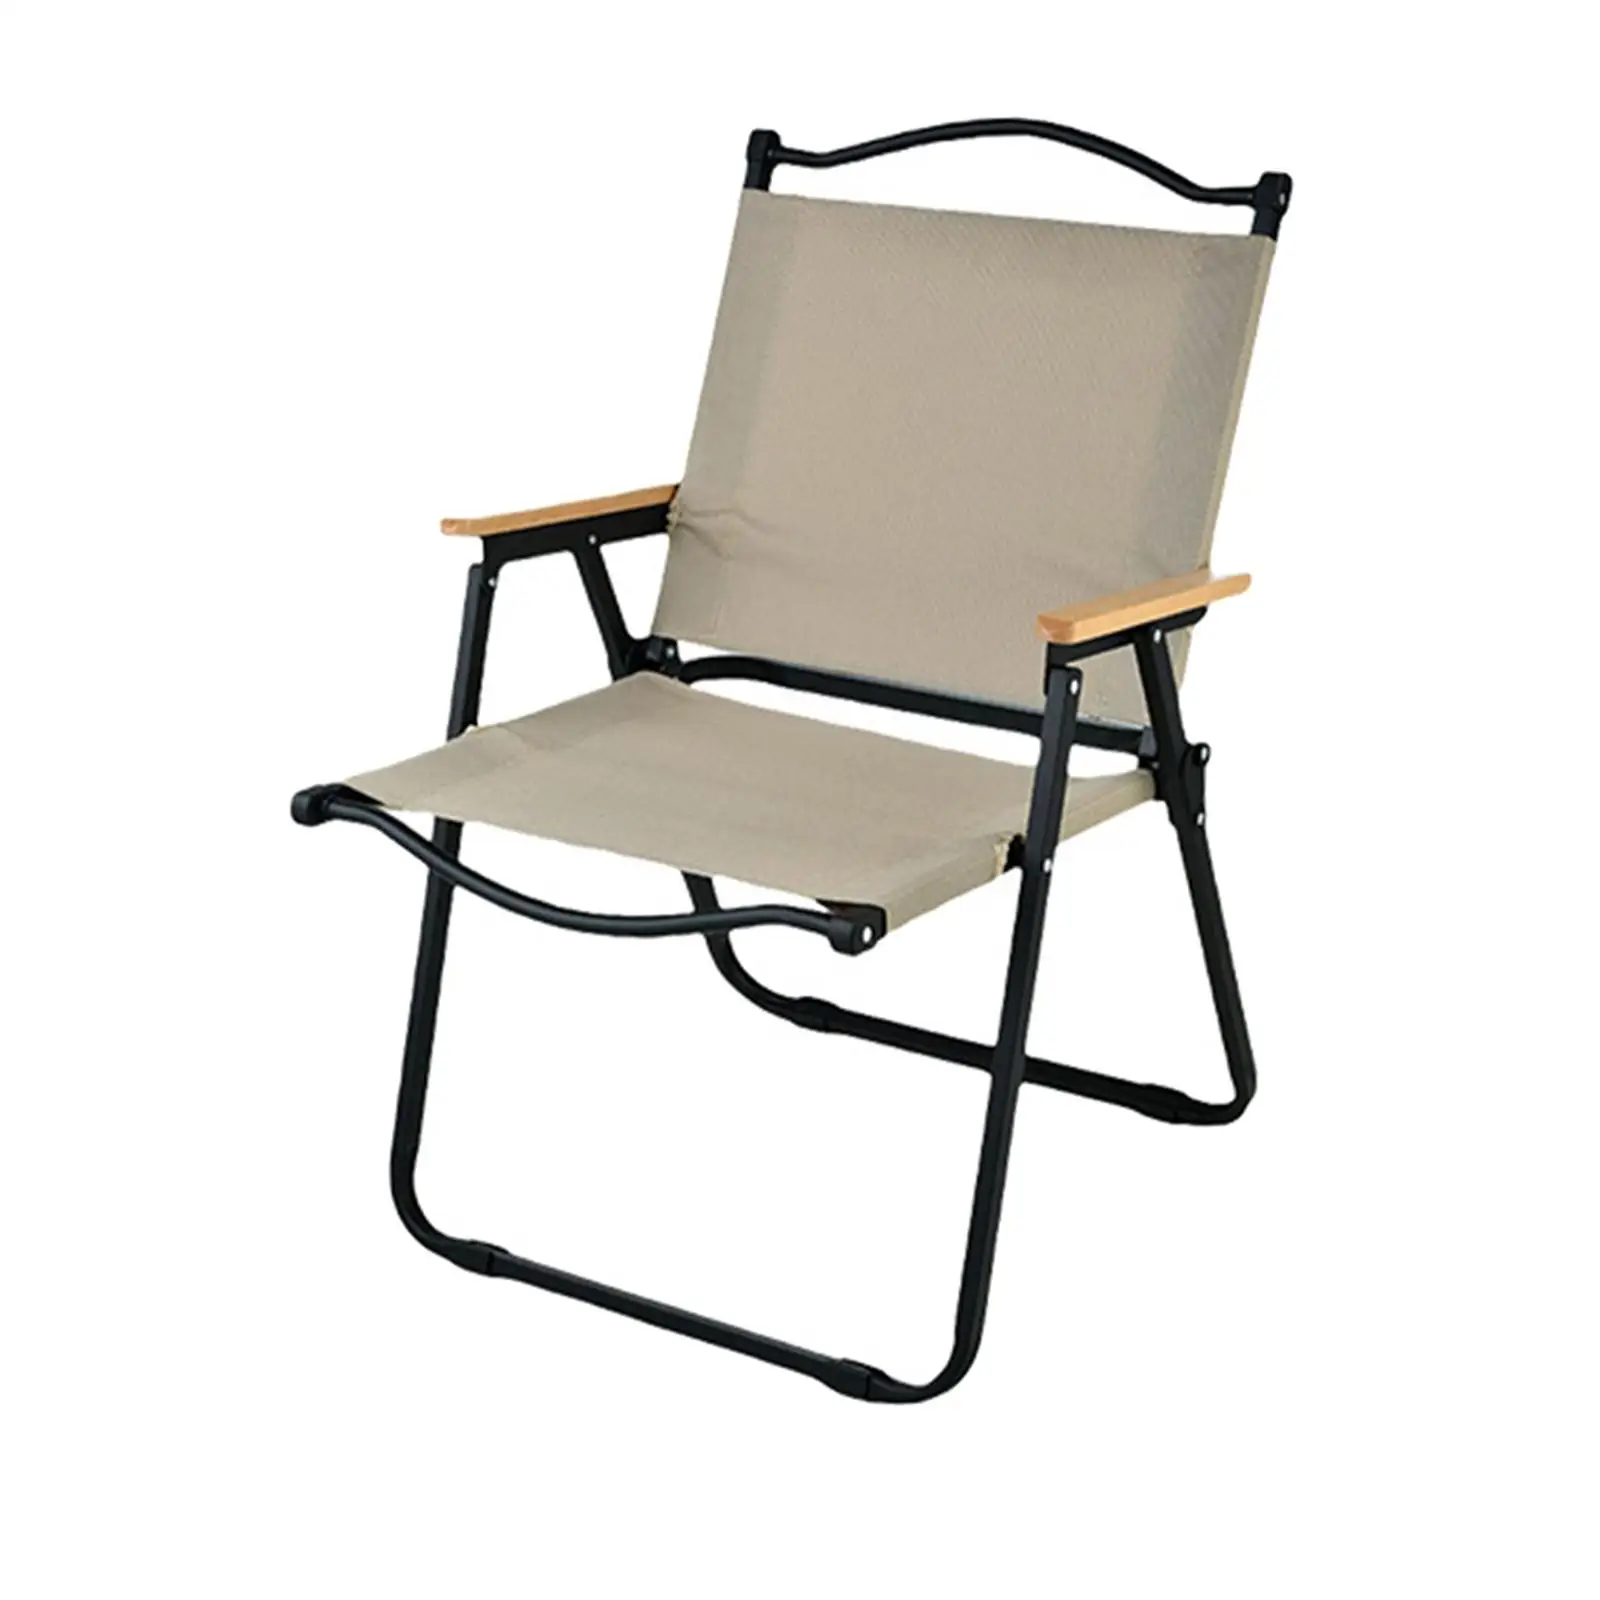 Camping Folding Chair Holds 500lbs Heavy Duty Outdoor Furniture for Lawn Beach Patio